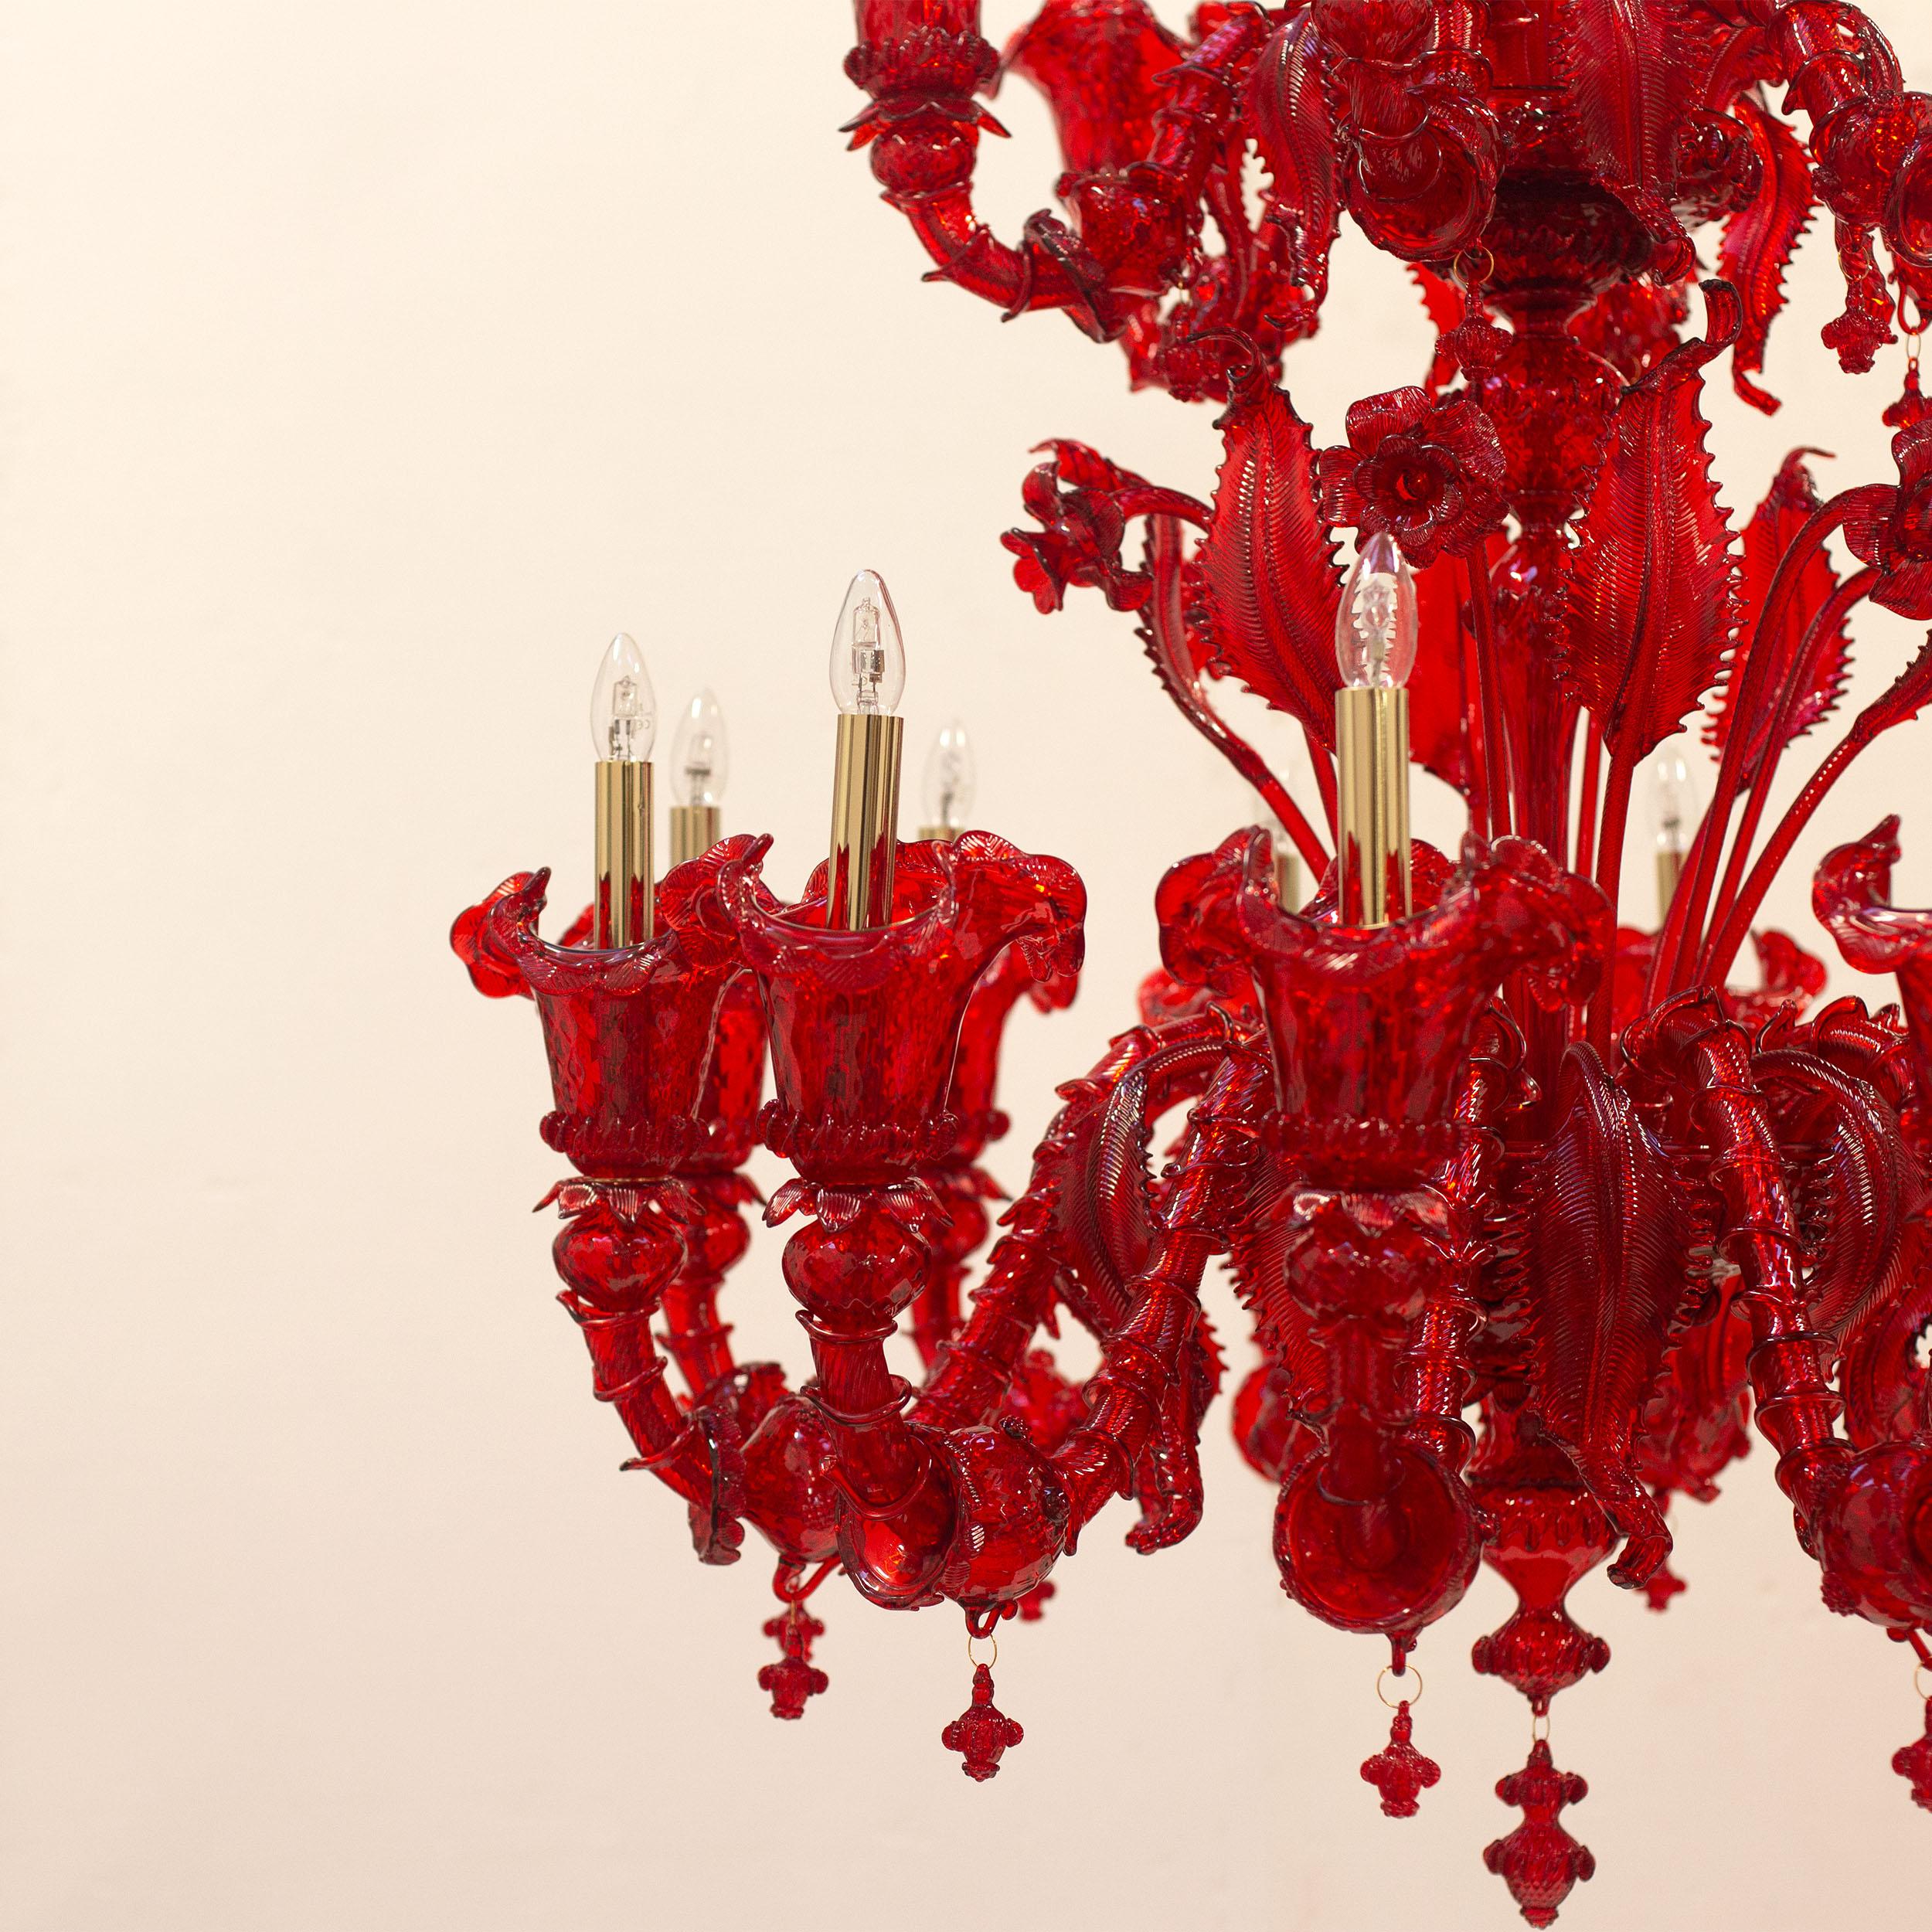 Rezzonico Chandelier, 12+6 arms, multi-tiered, red Murano glass by Multiforme For Sale 4